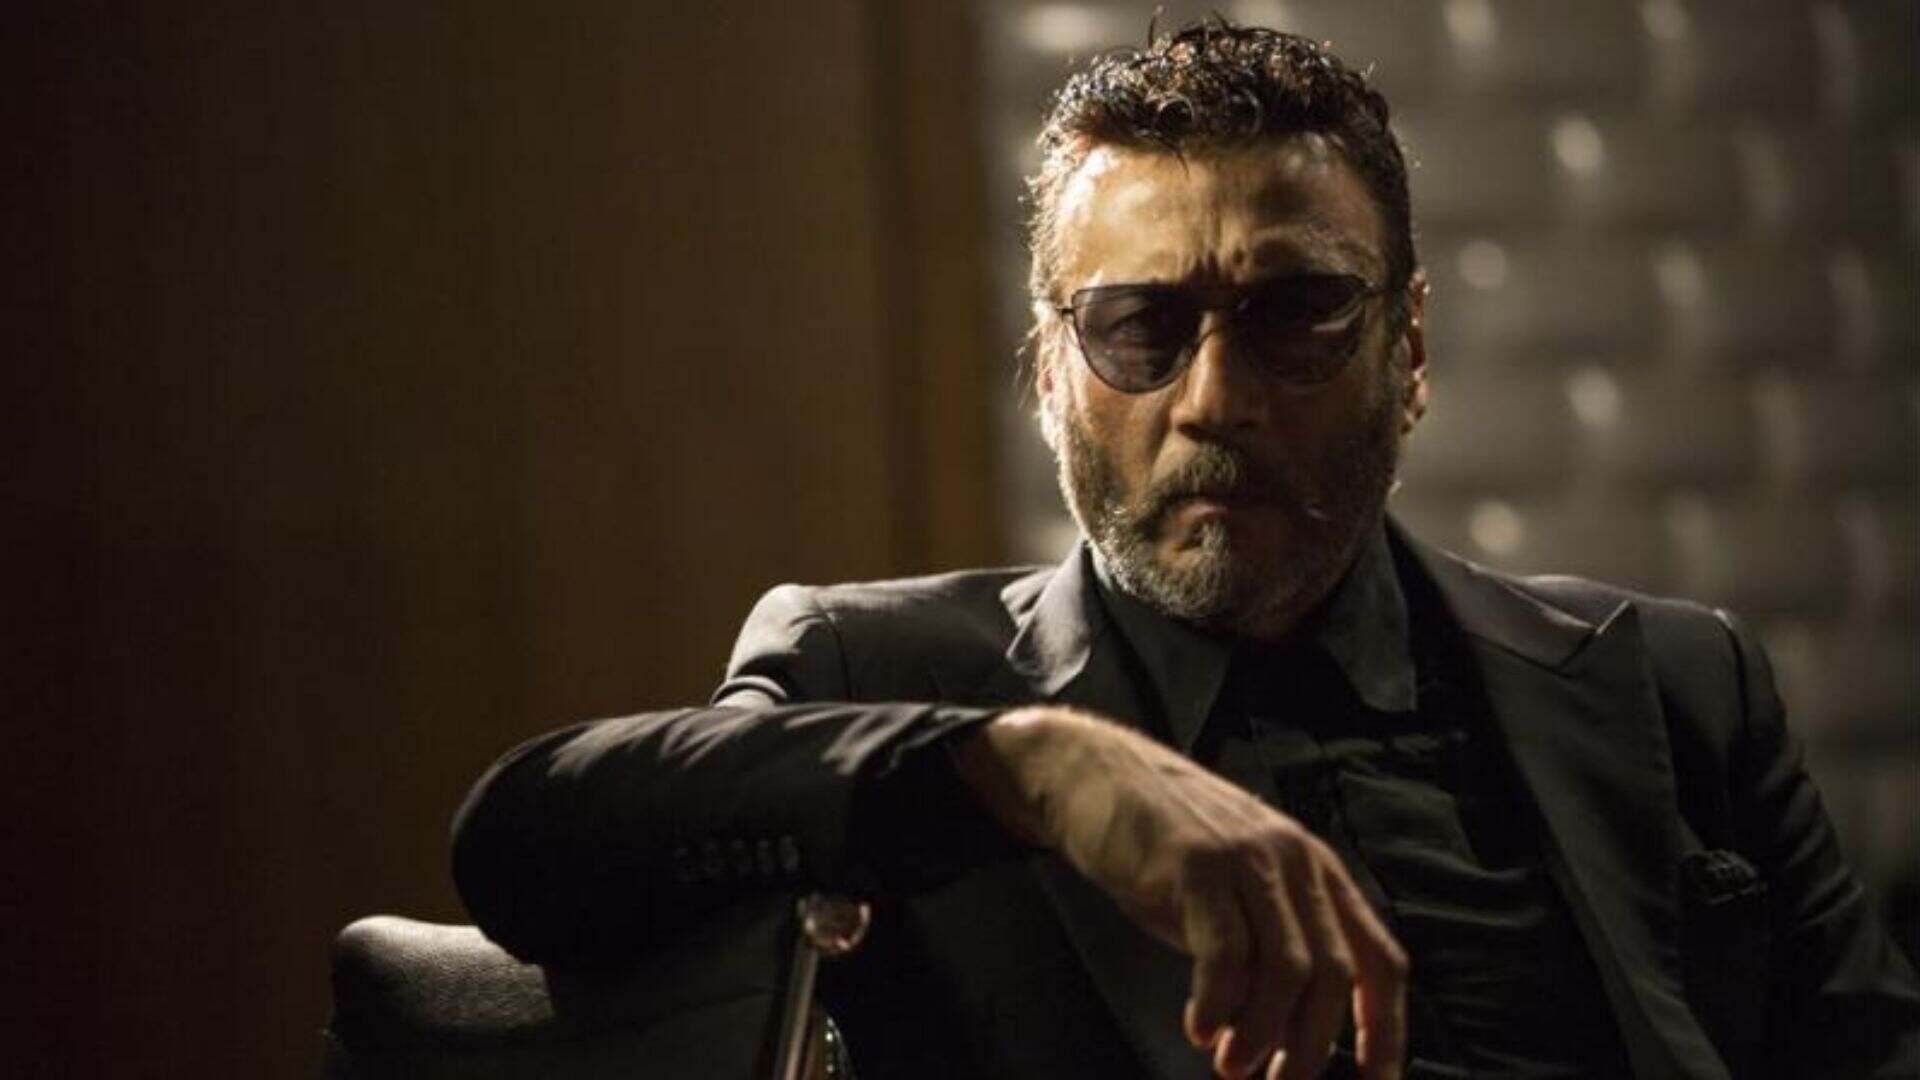 Jackie Shroff Files Lawsuit to Protect Personality Rights, Including Use of “Bhidu” Without Consent